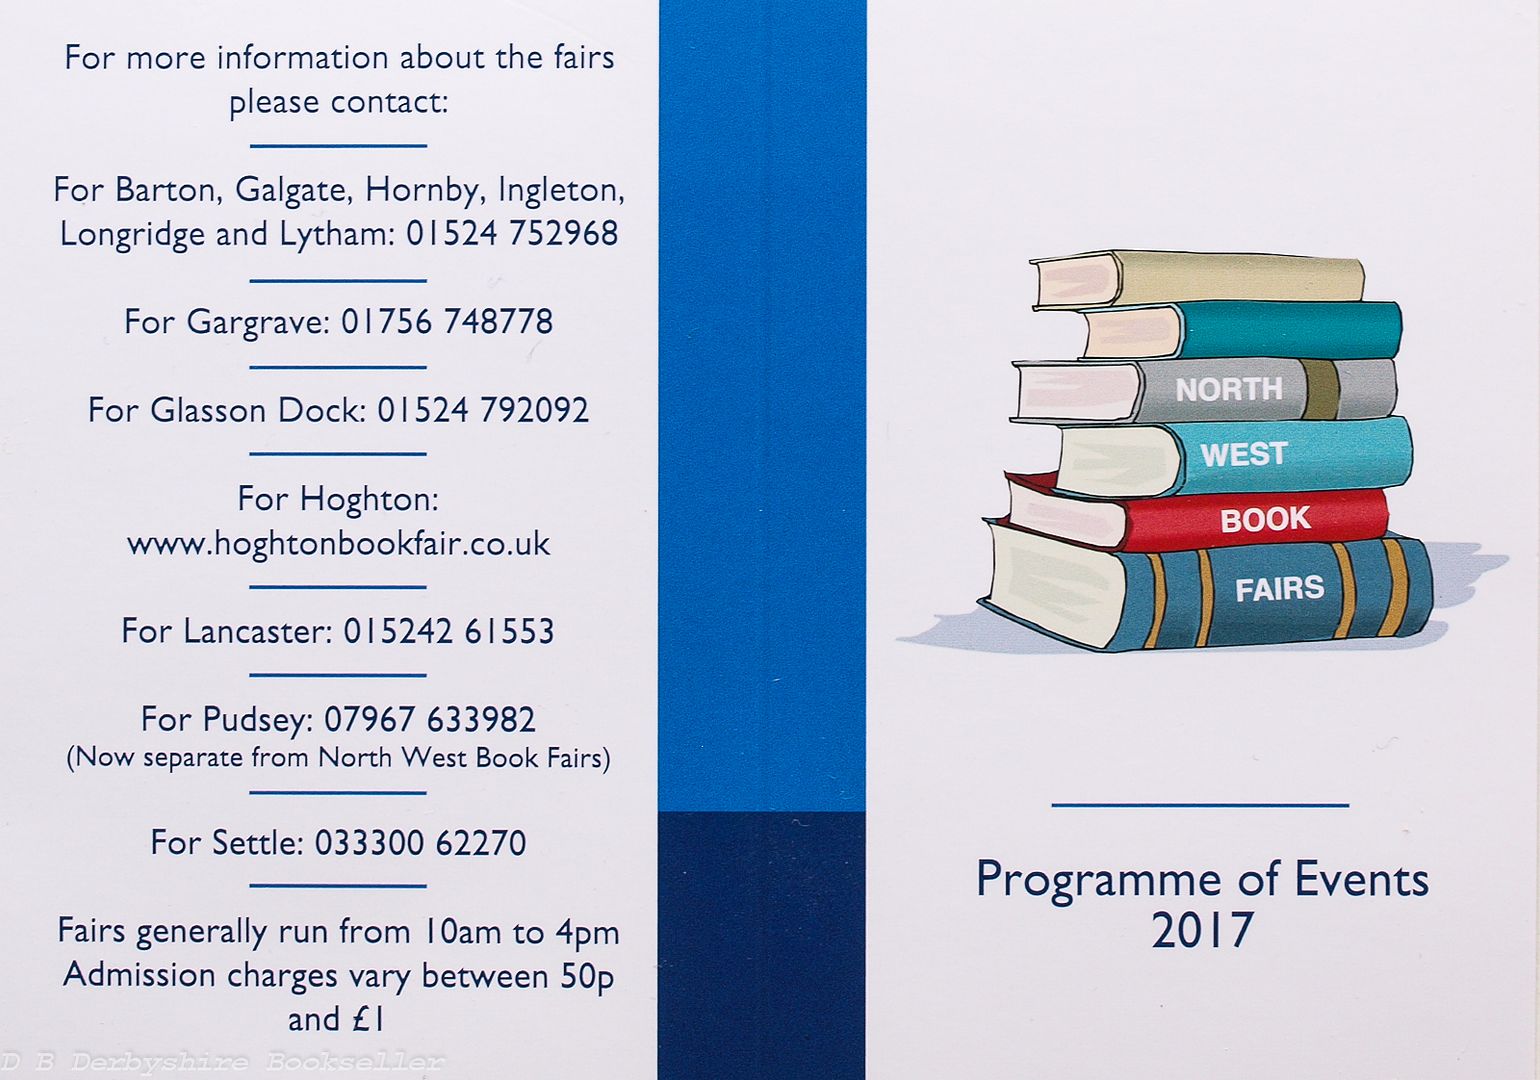 2017 North West Book Fairs Programme of Events